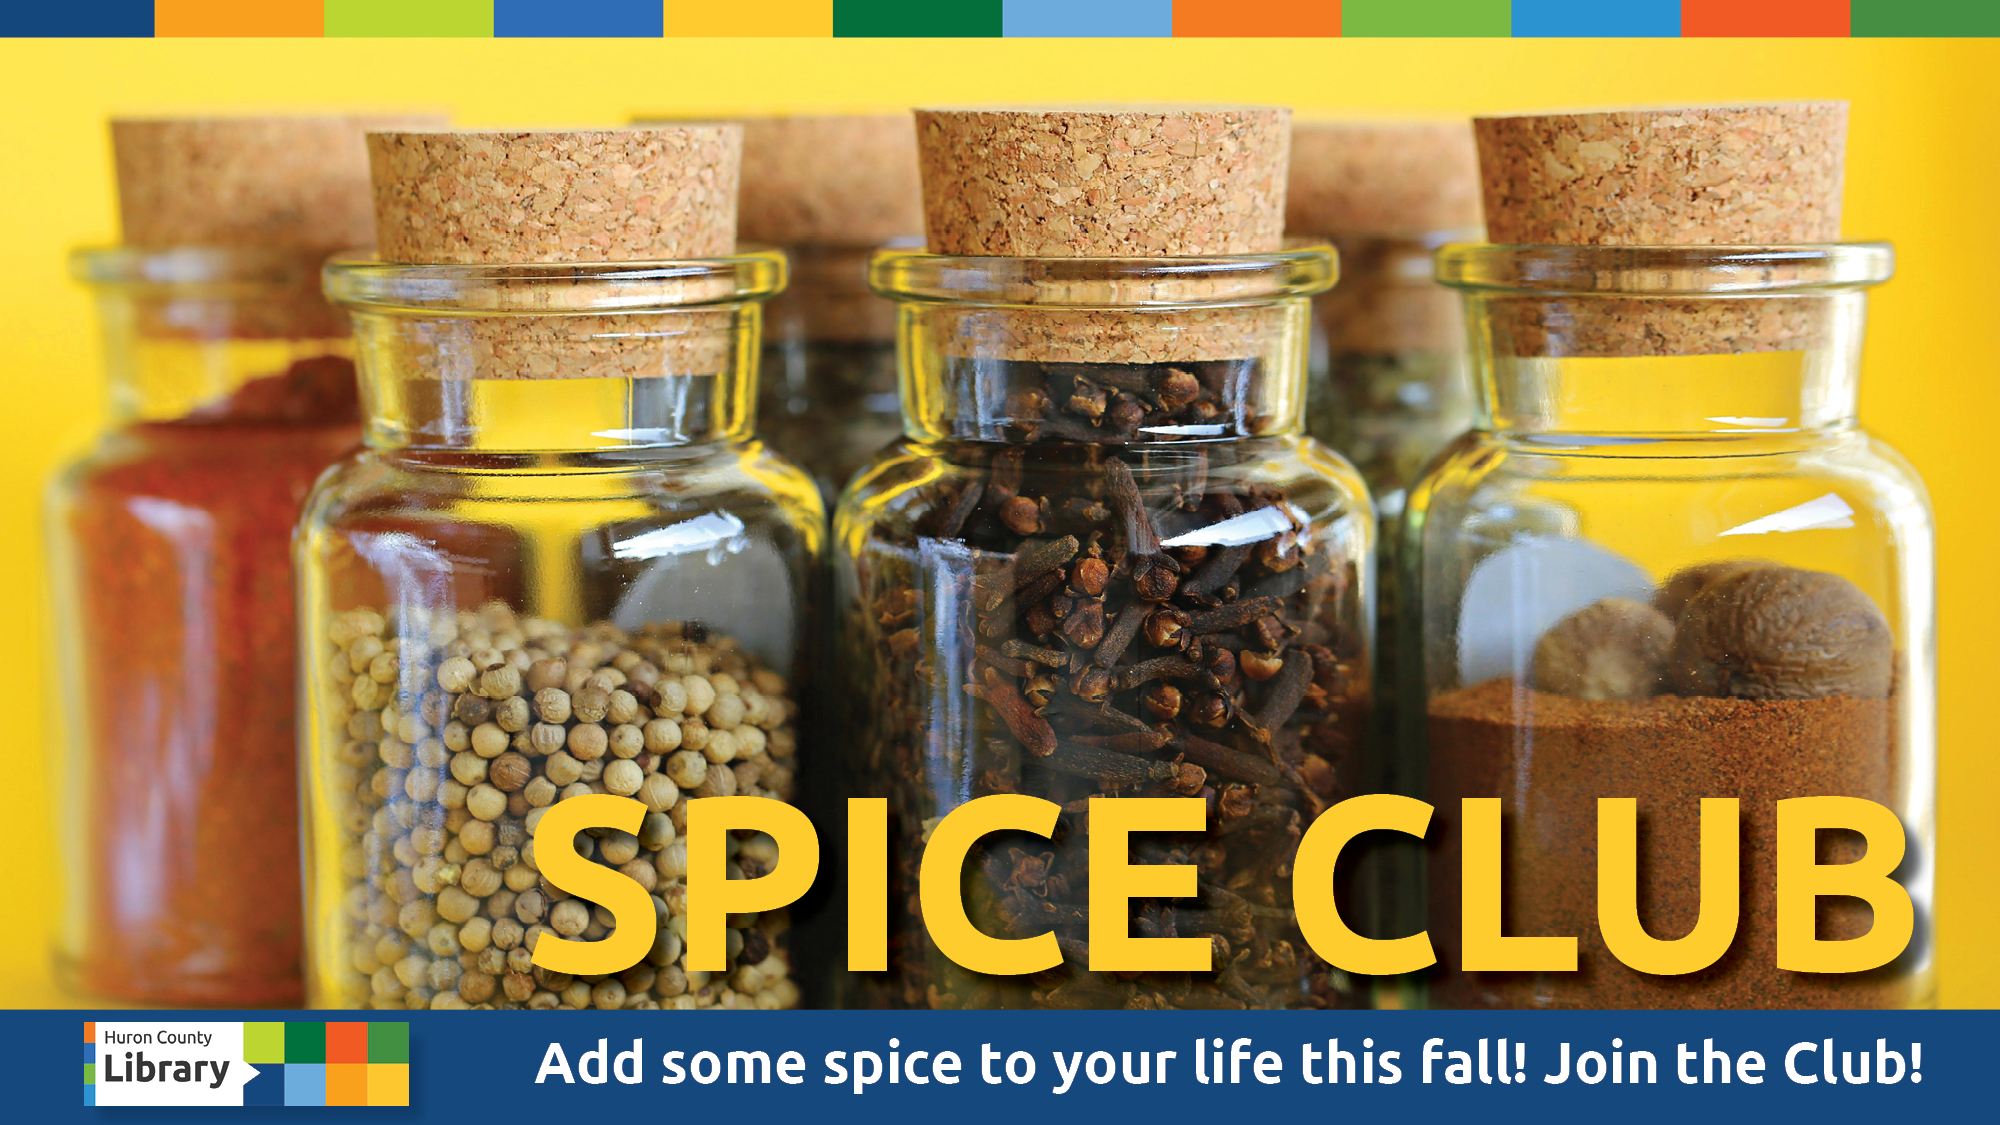 image of jars of spices with text promoting Spice Club